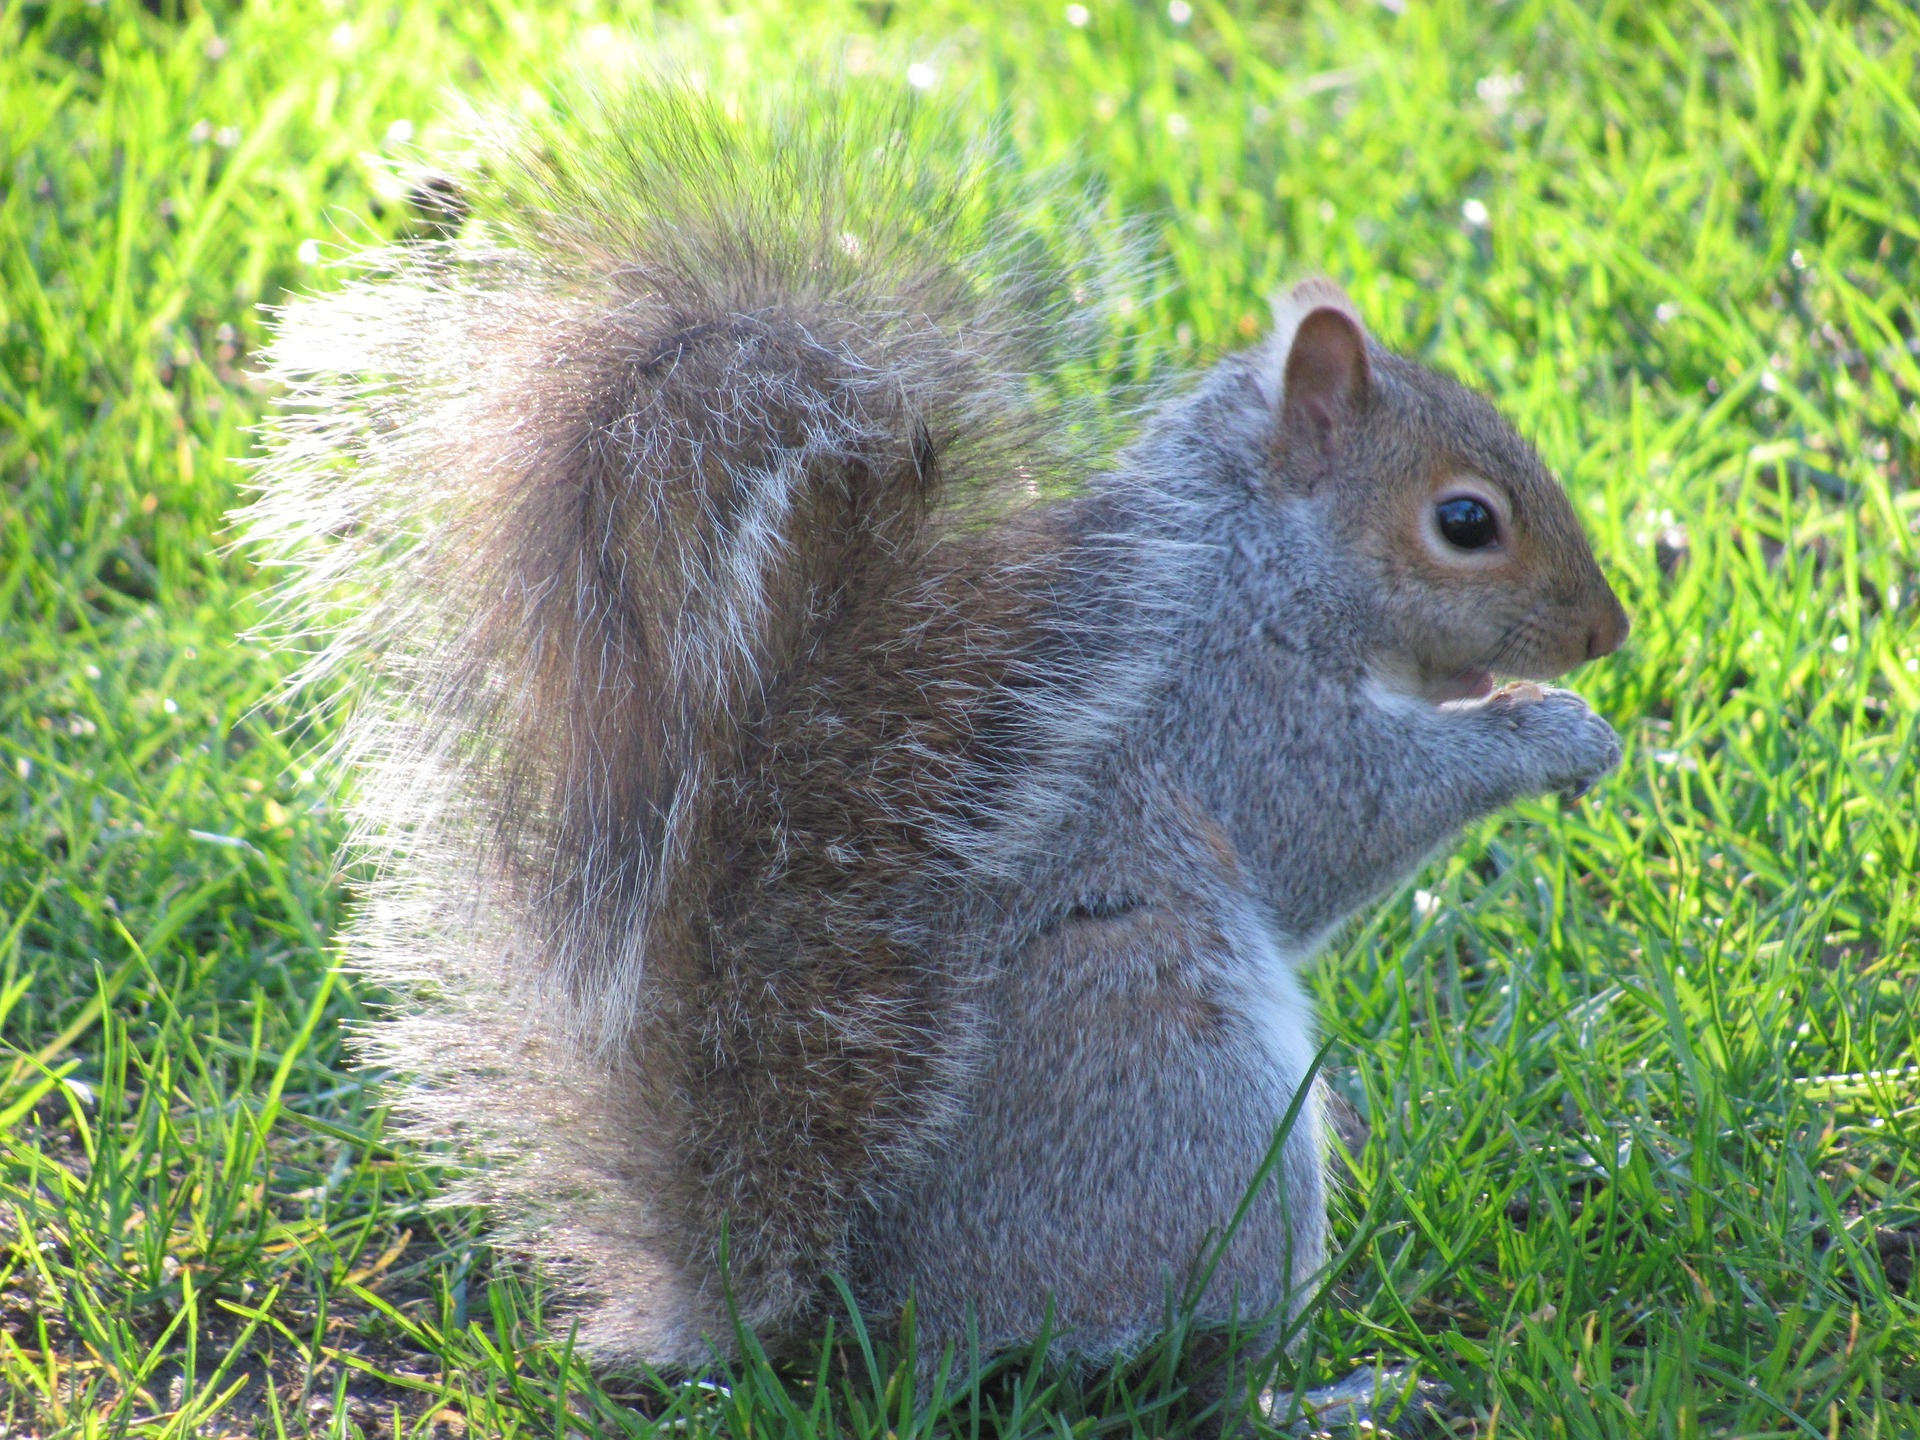 Squirrels: How to Get Rid of Squirrels in the Garden | The Old ...